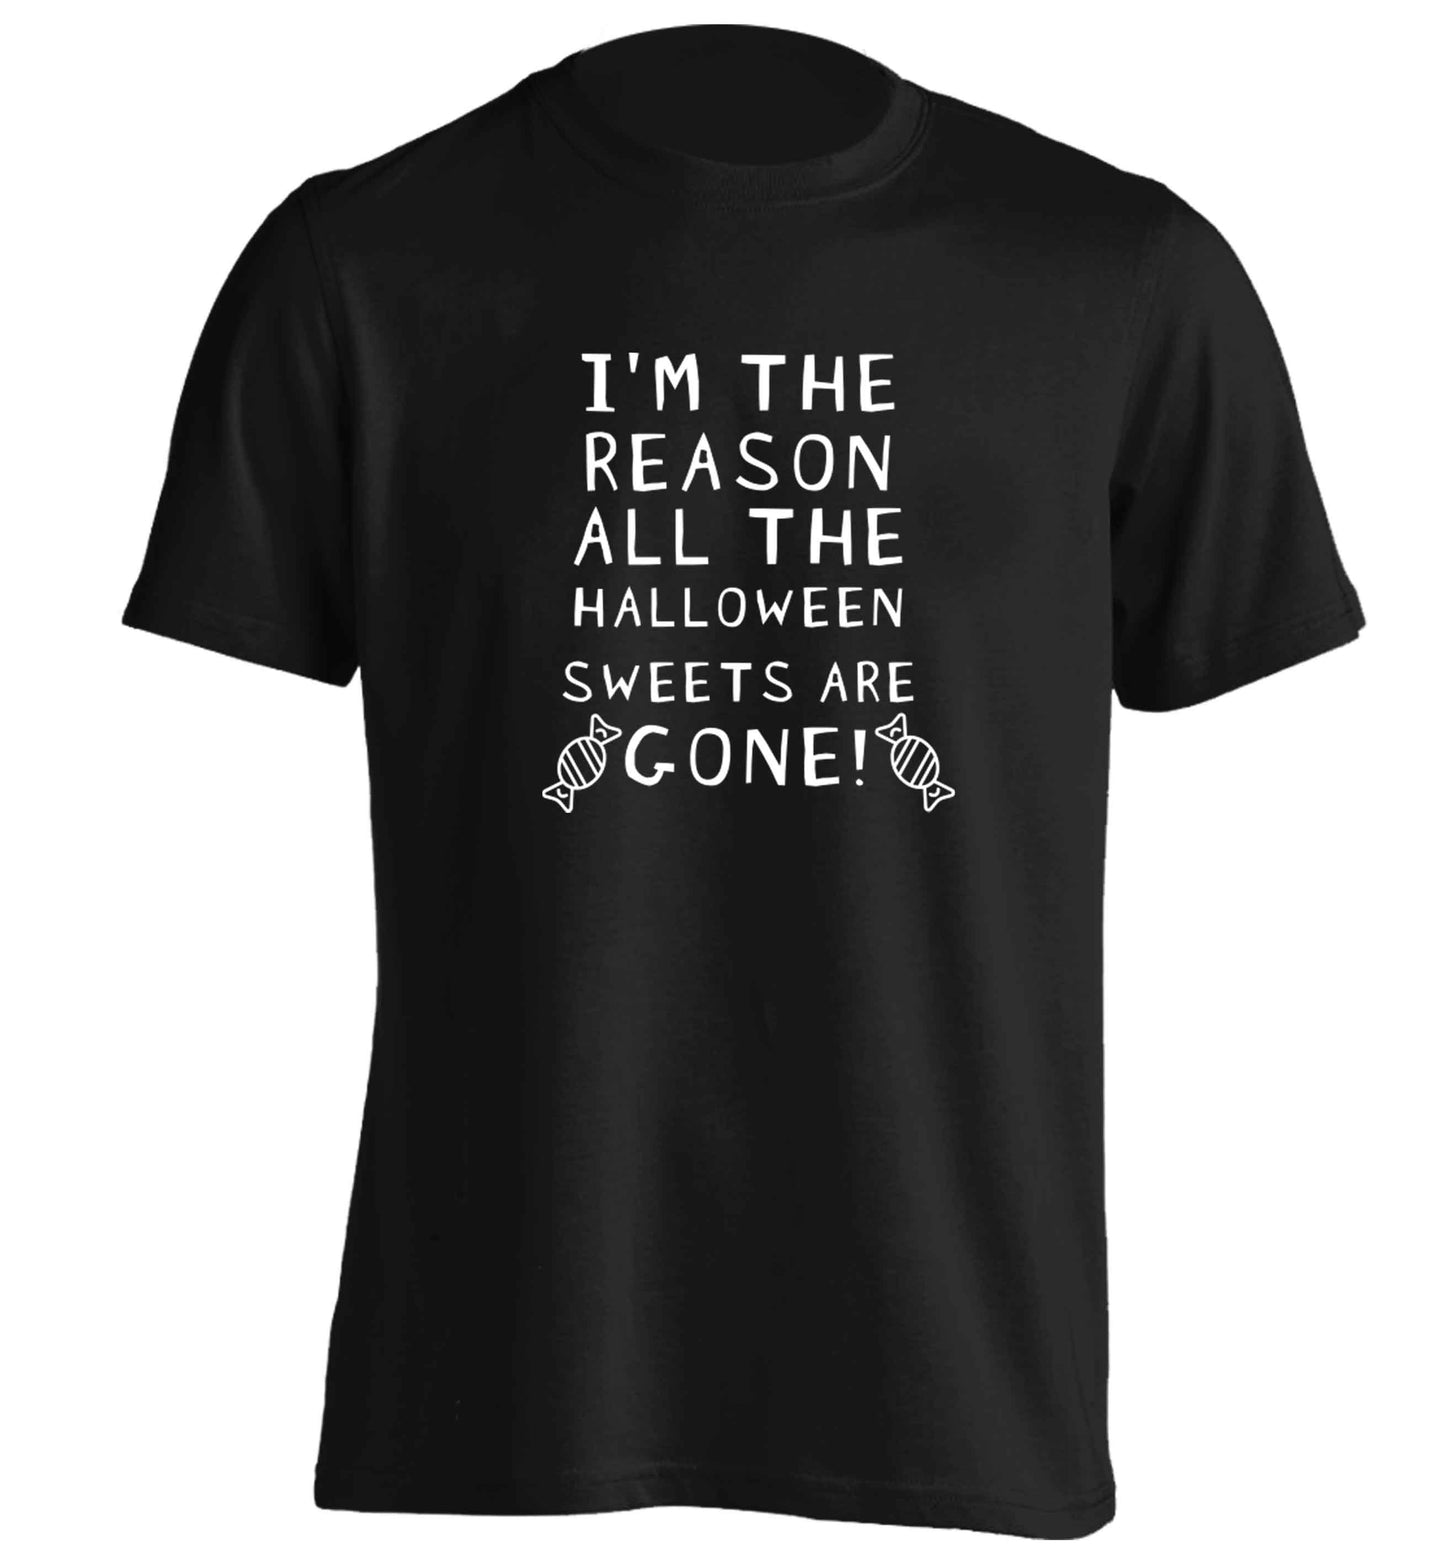 I'm the reason all of the halloween sweets are gone adults unisex black Tshirt 2XL